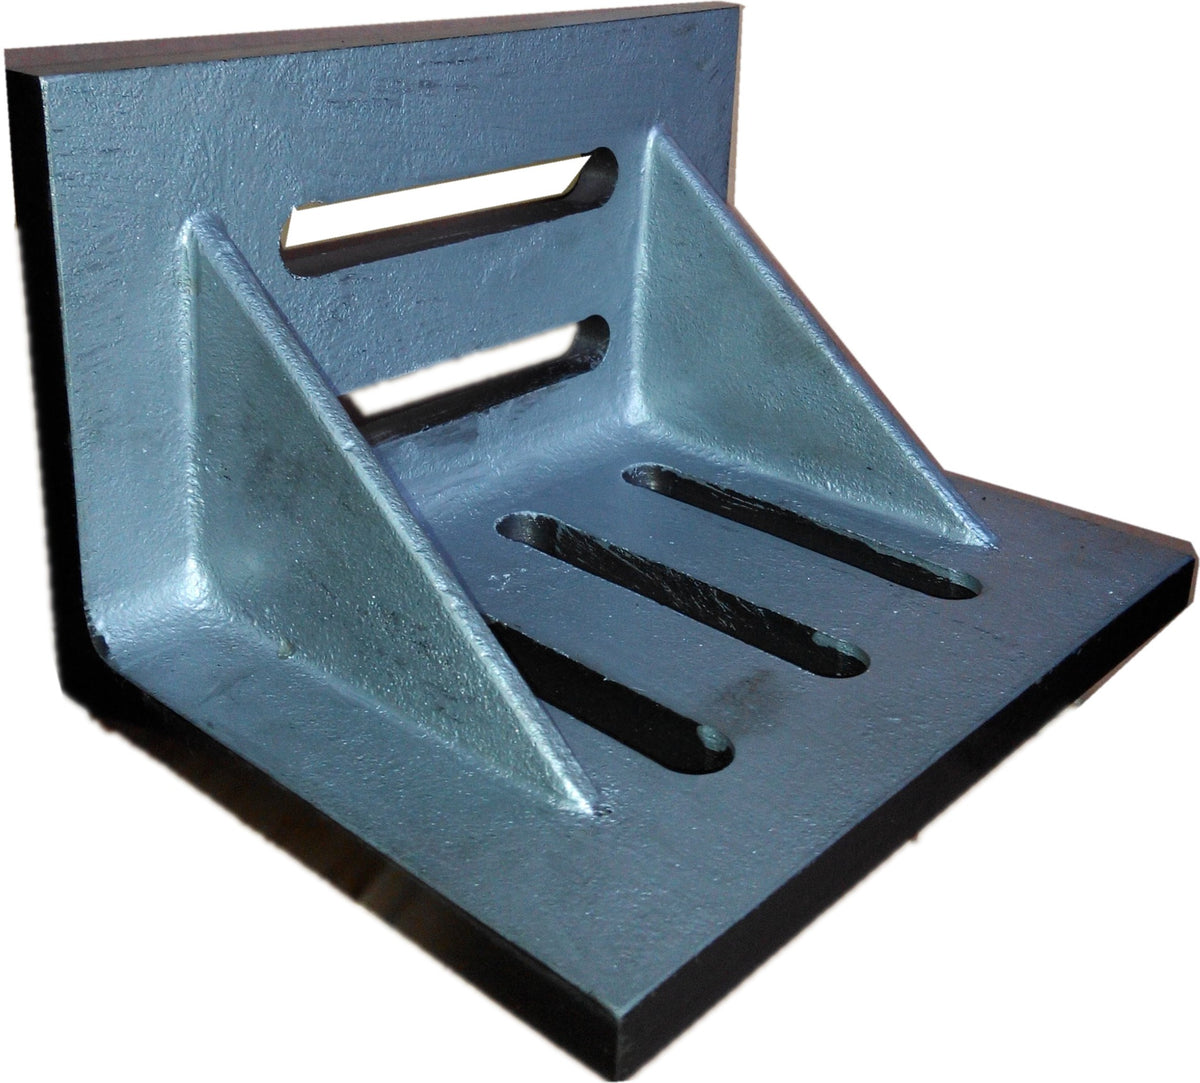 8 X 6 X 5" WEBBED SLOTTED ANGLE PLATE